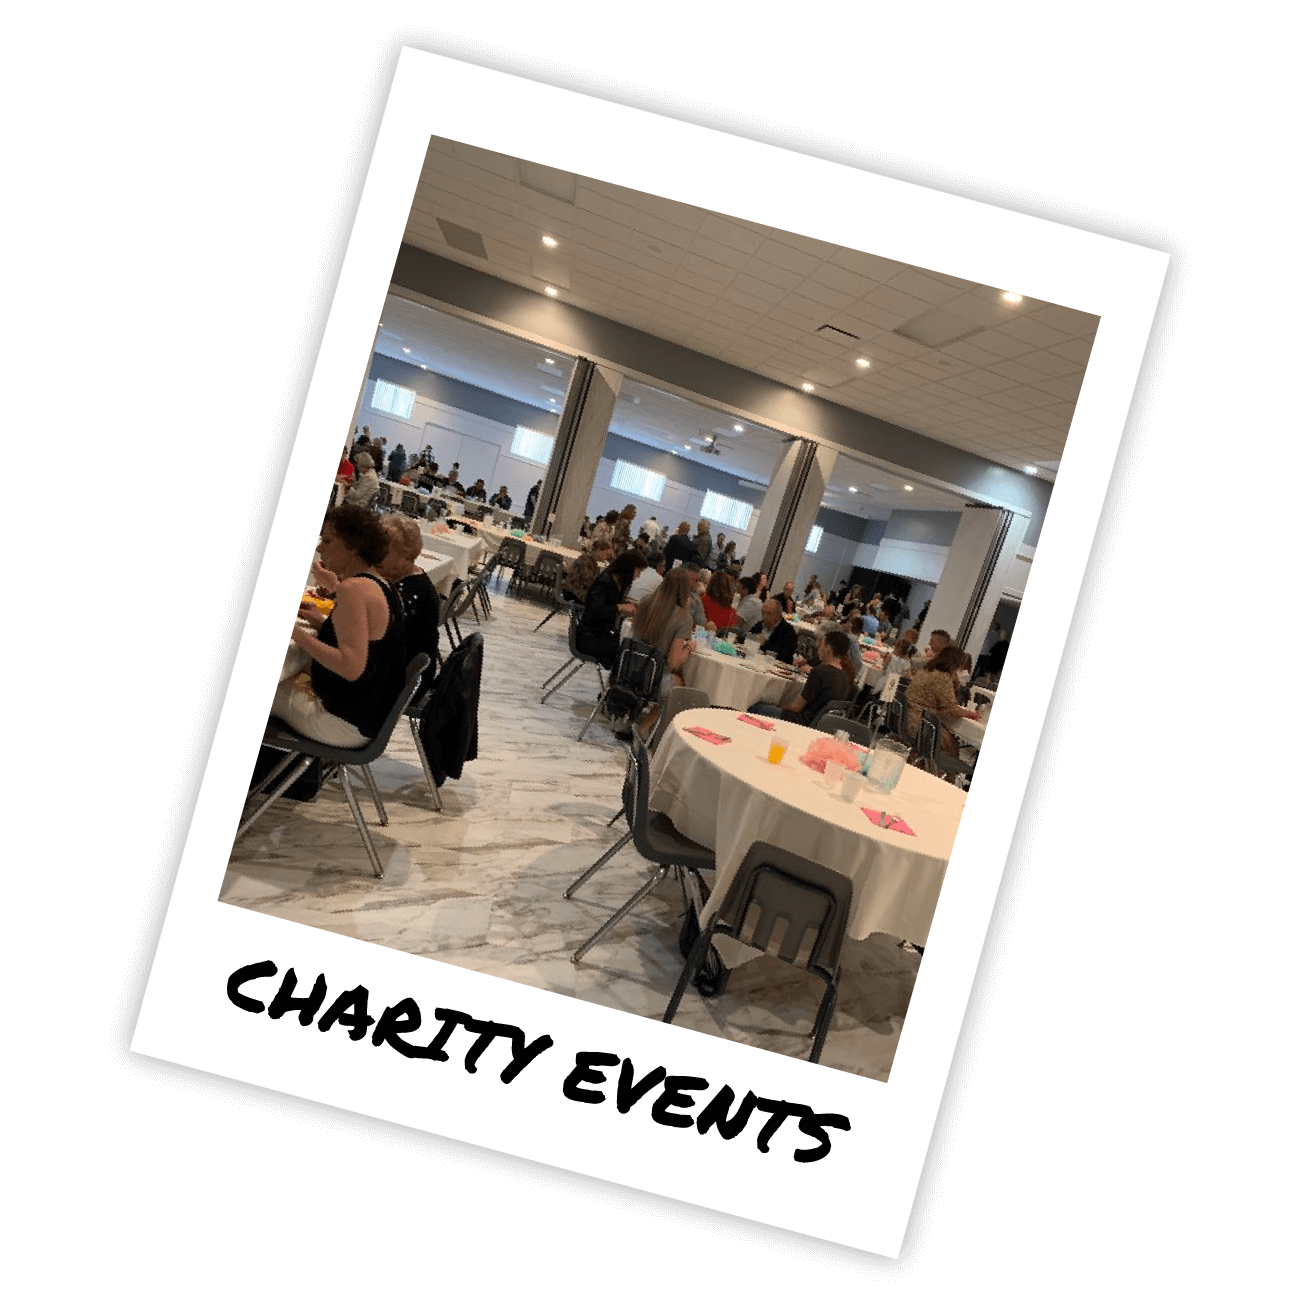 Charity Event Venue 